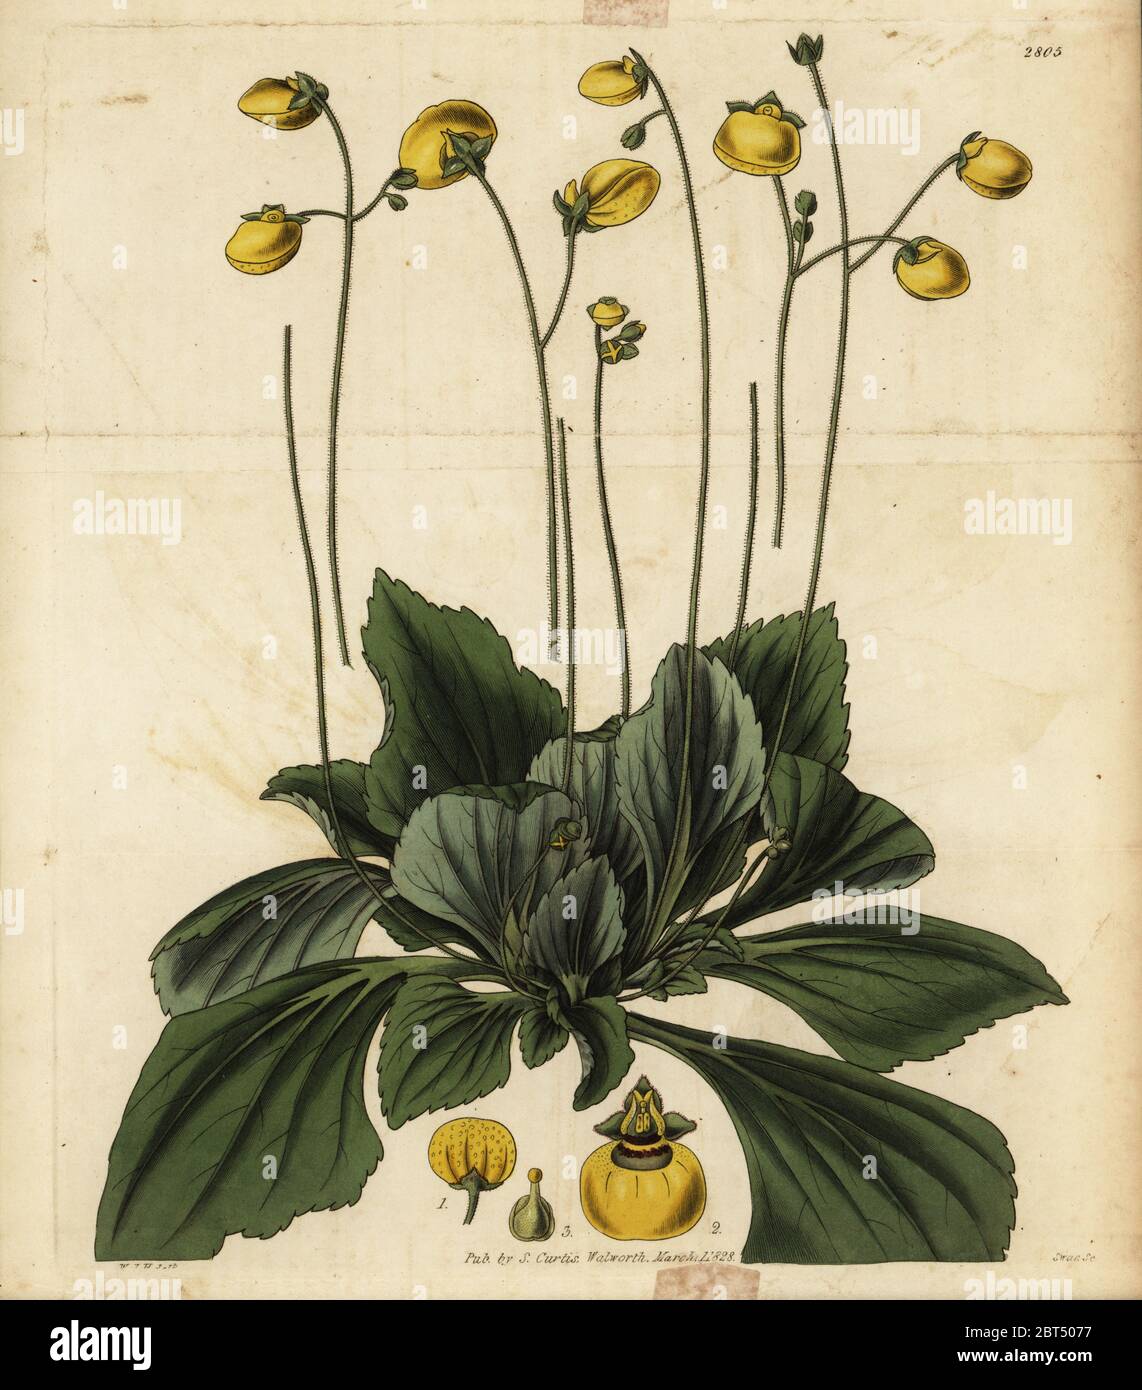 Slipperwort, Calceolaria biflora (Plaintain-leaved slipperwort, Calceolaria plantaginea). Handcoloured copperplate engraving by Swan after an illustration by William Jackson Hooker from Samuel Curtis' Botanical Magazine, London, 1828. Stock Photo